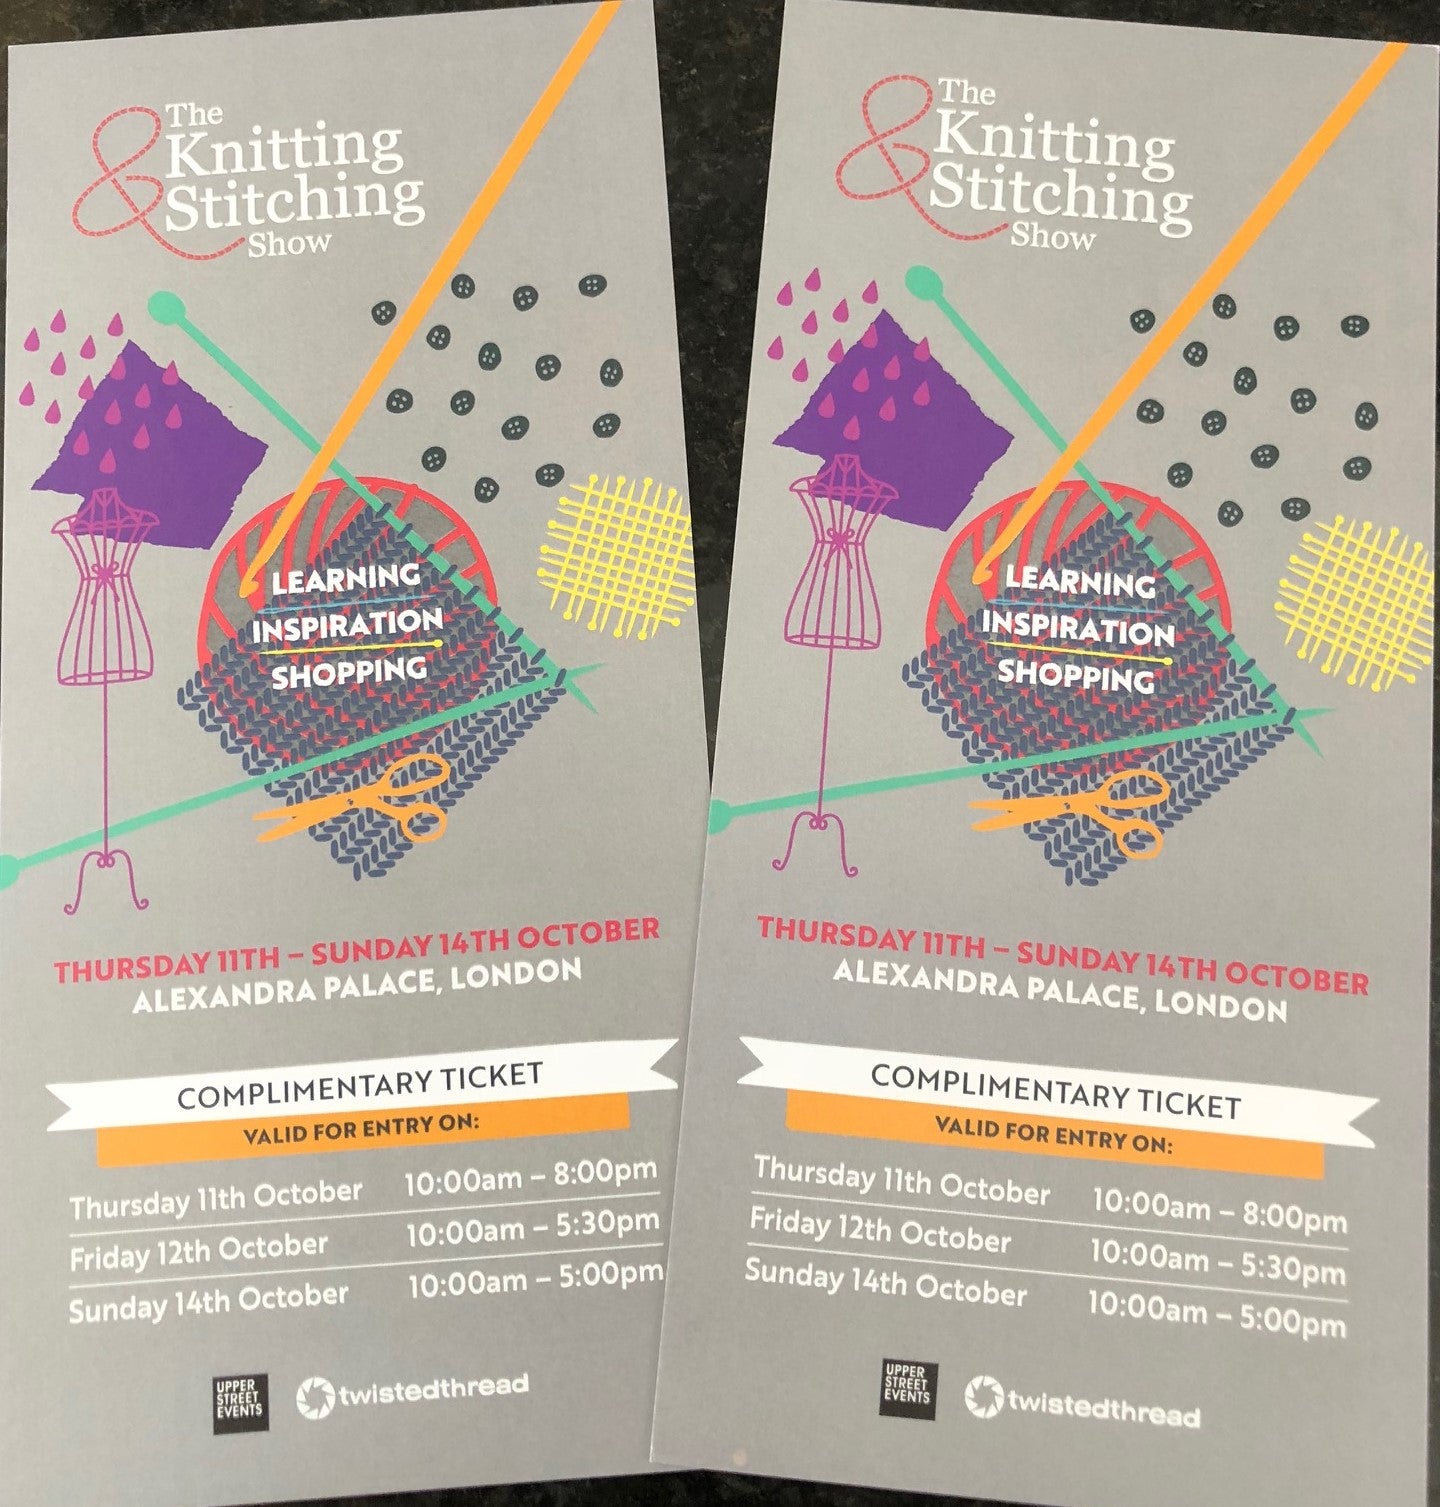 2 Tickets for Knitting & Stitching, Ally Pally - GIVE-AWAY